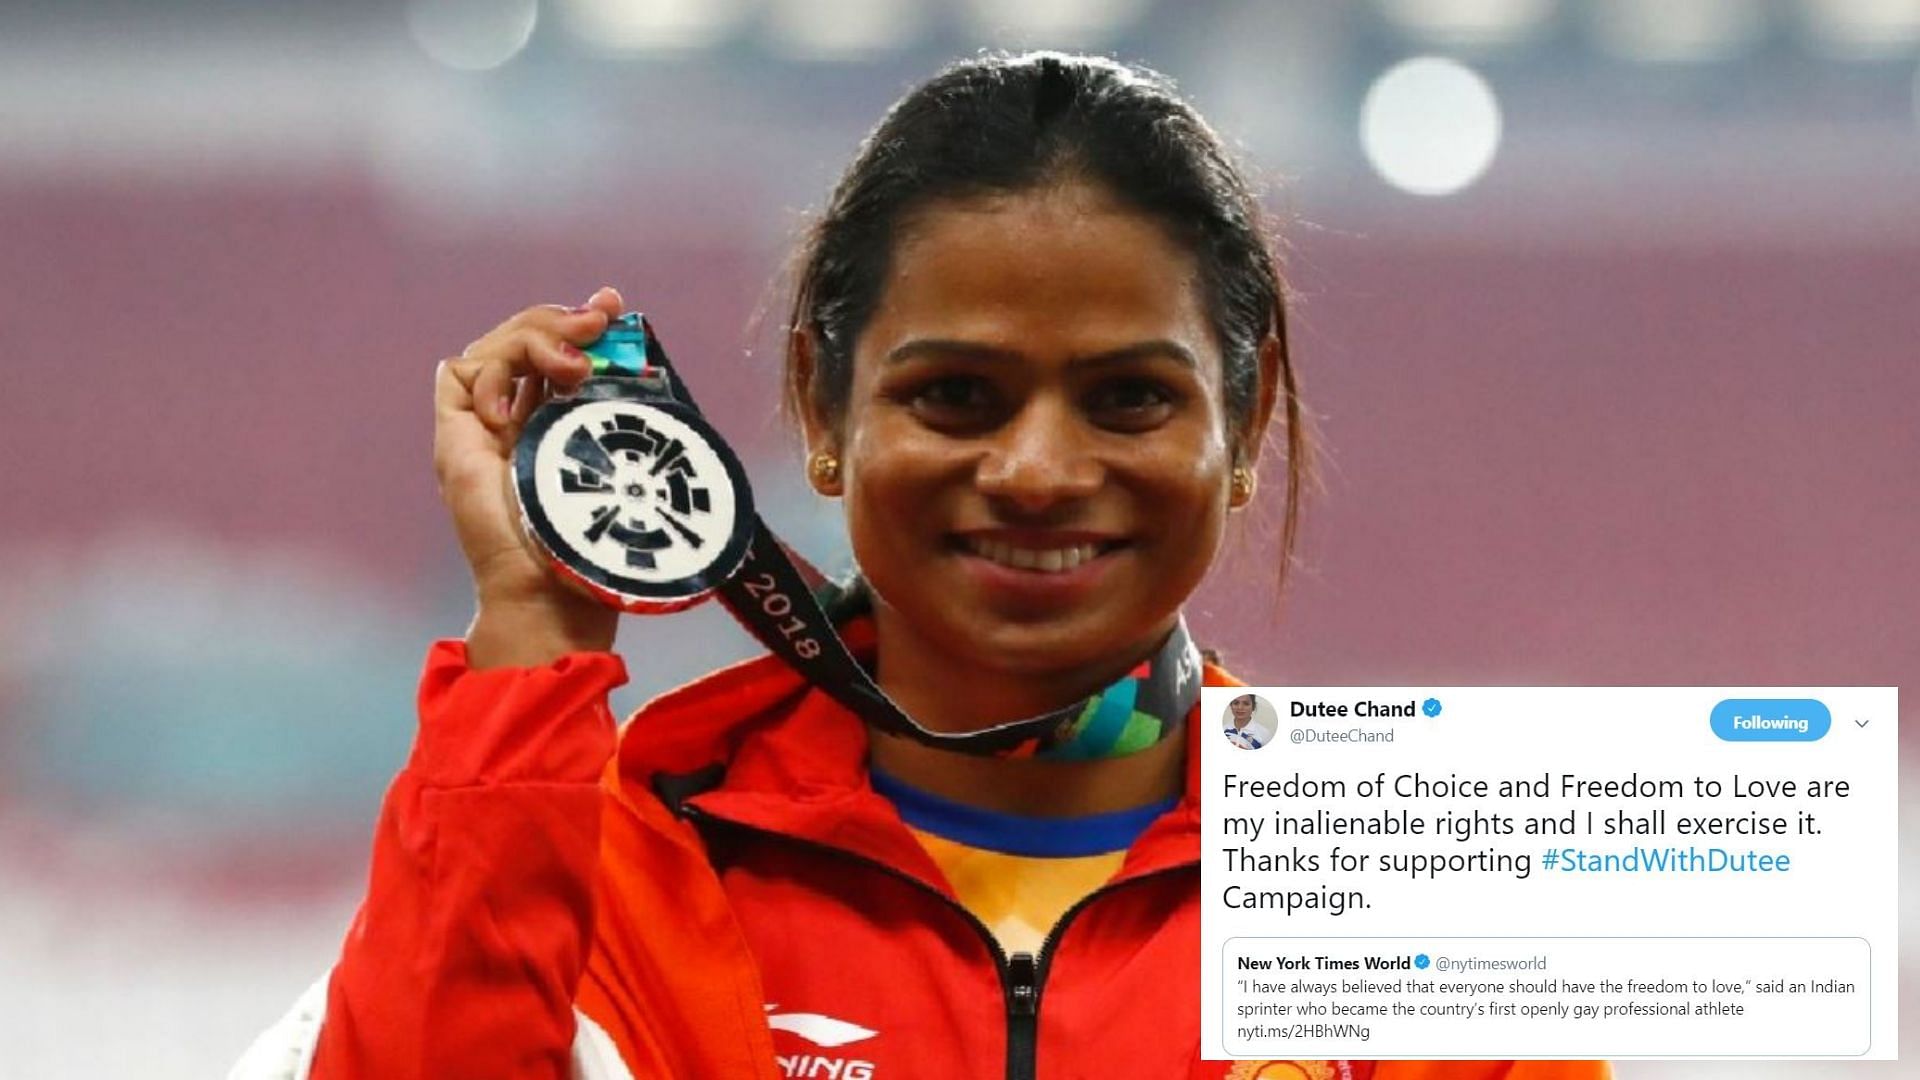 After a lot of controversy regarding a fake account by her name, Dutee Chand finally got her twitter handle verified.